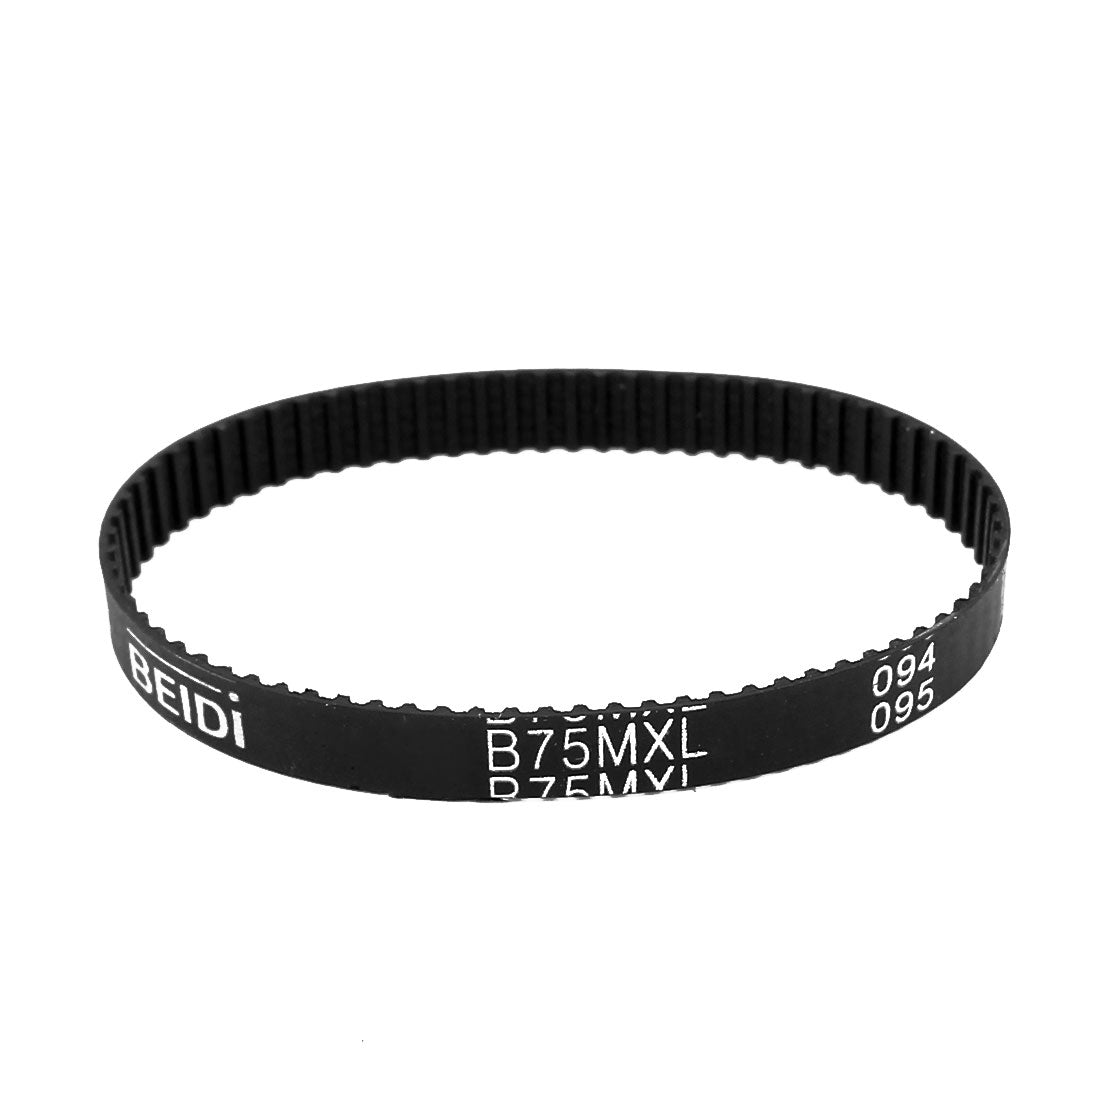 uxcell Uxcell B75MXL Rubber Timing Belt Synchronous Closed Loop 75 Teeth 6mm Width 154mm Perimeter